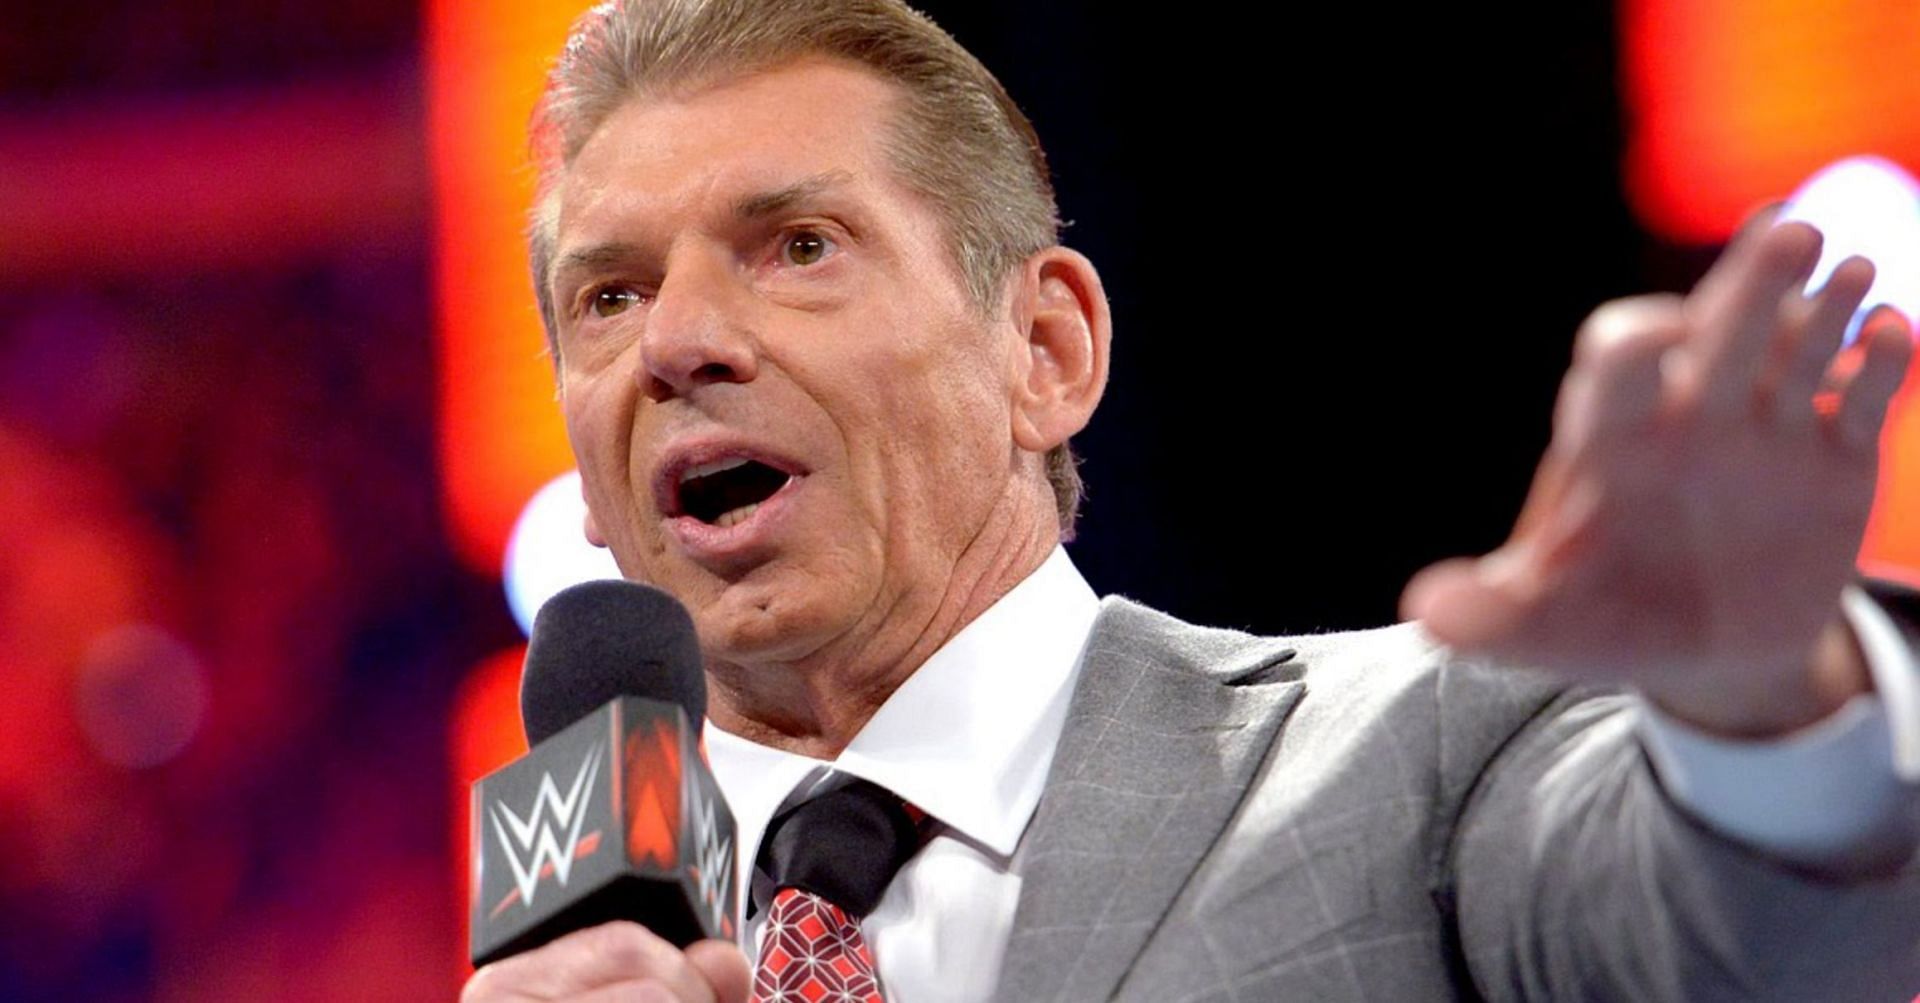 Vince McMahon convinced KO to stay on